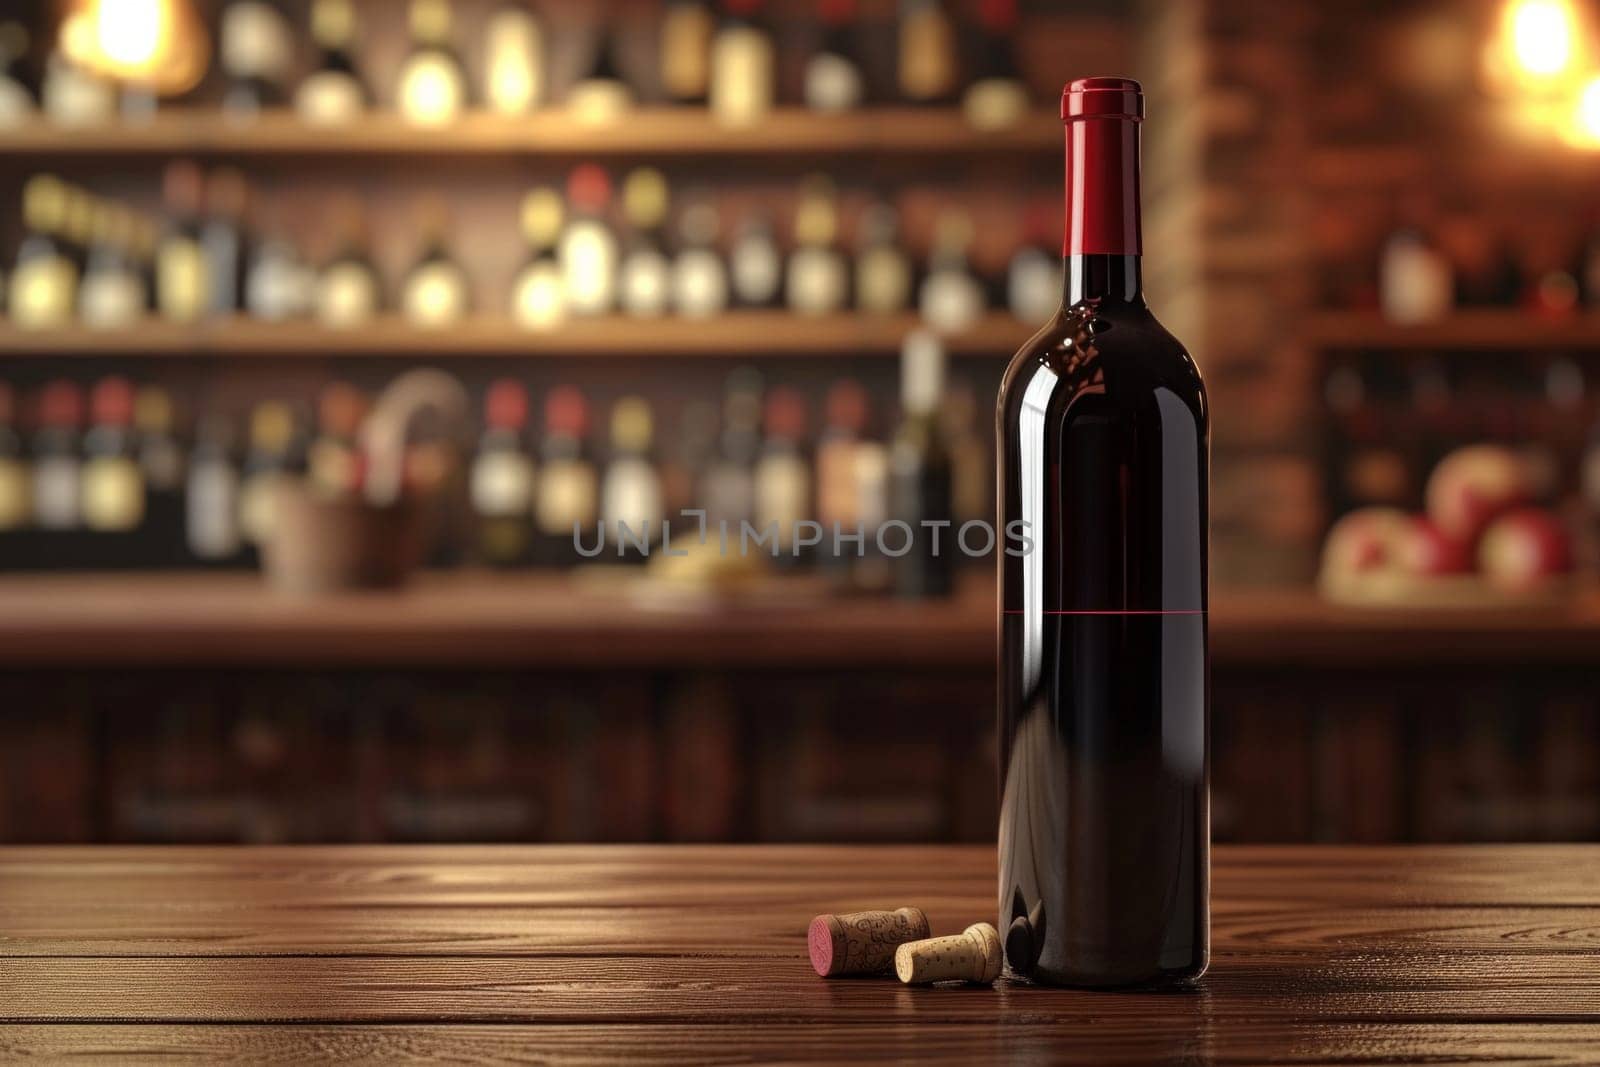 Red wine bottle sits on a wooden counter in a bar or pub.